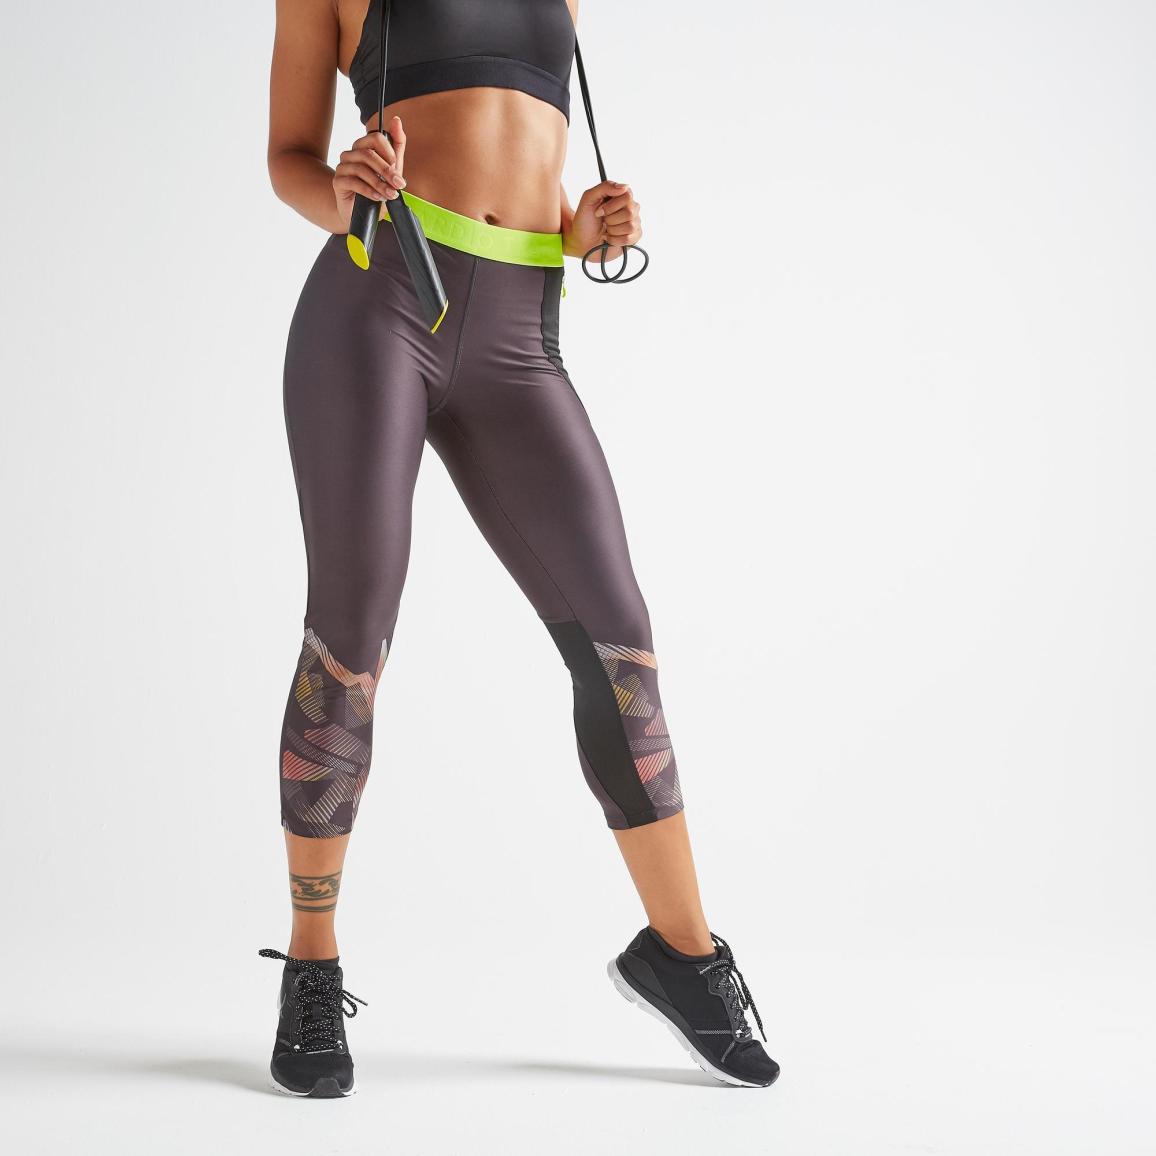 Finding Activewear To Perfect Fitness Choosing